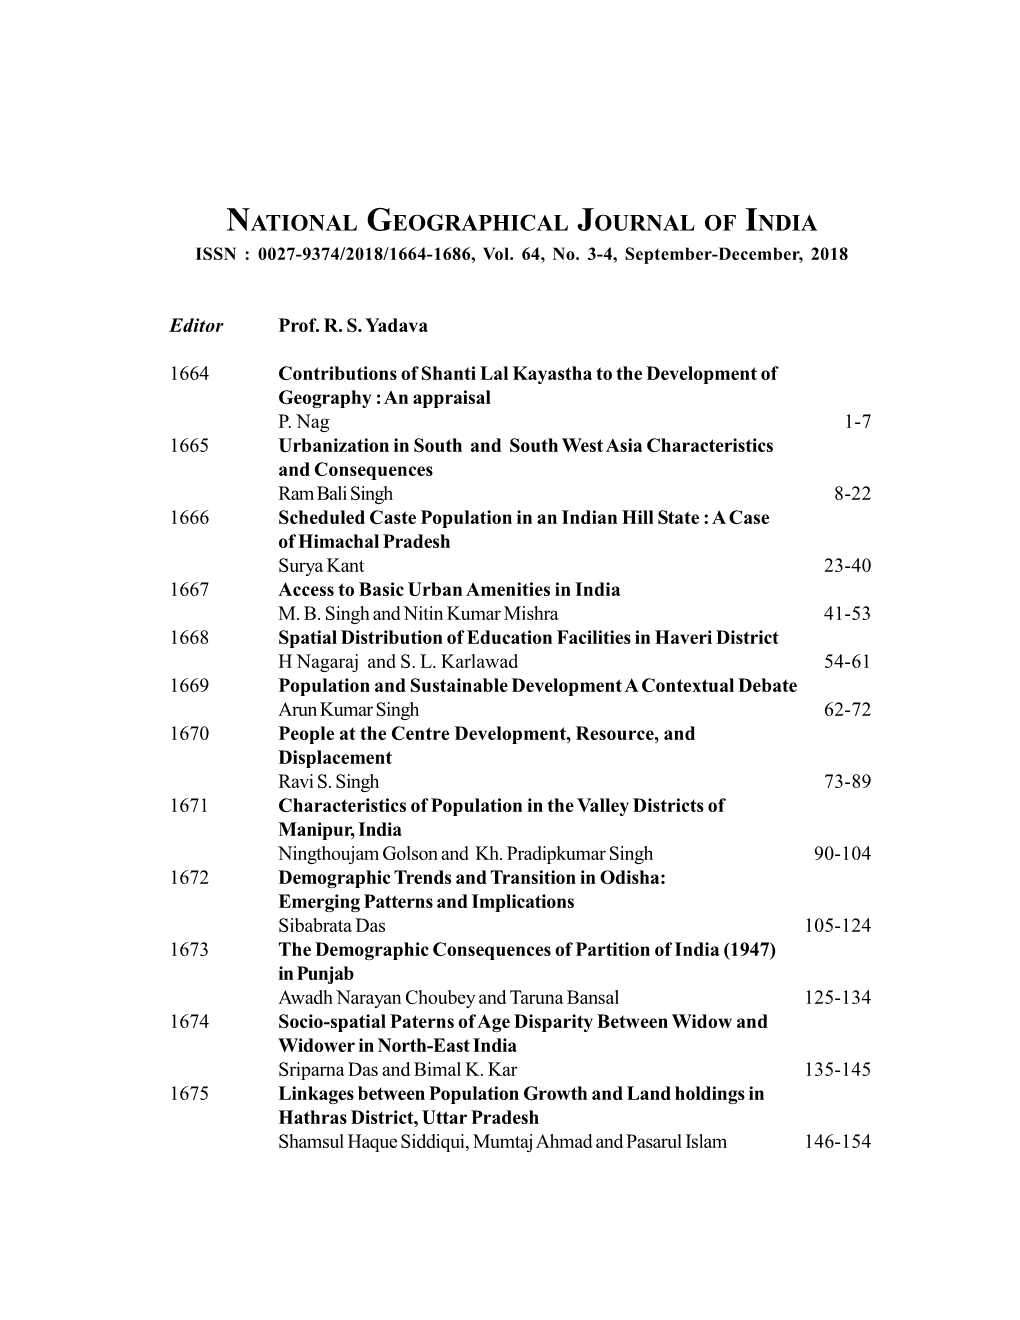 NATIONAL GEOGRAPHICAL JOURNAL of INDIA ISSN : 0027-9374/2018/1664-1686, Vol